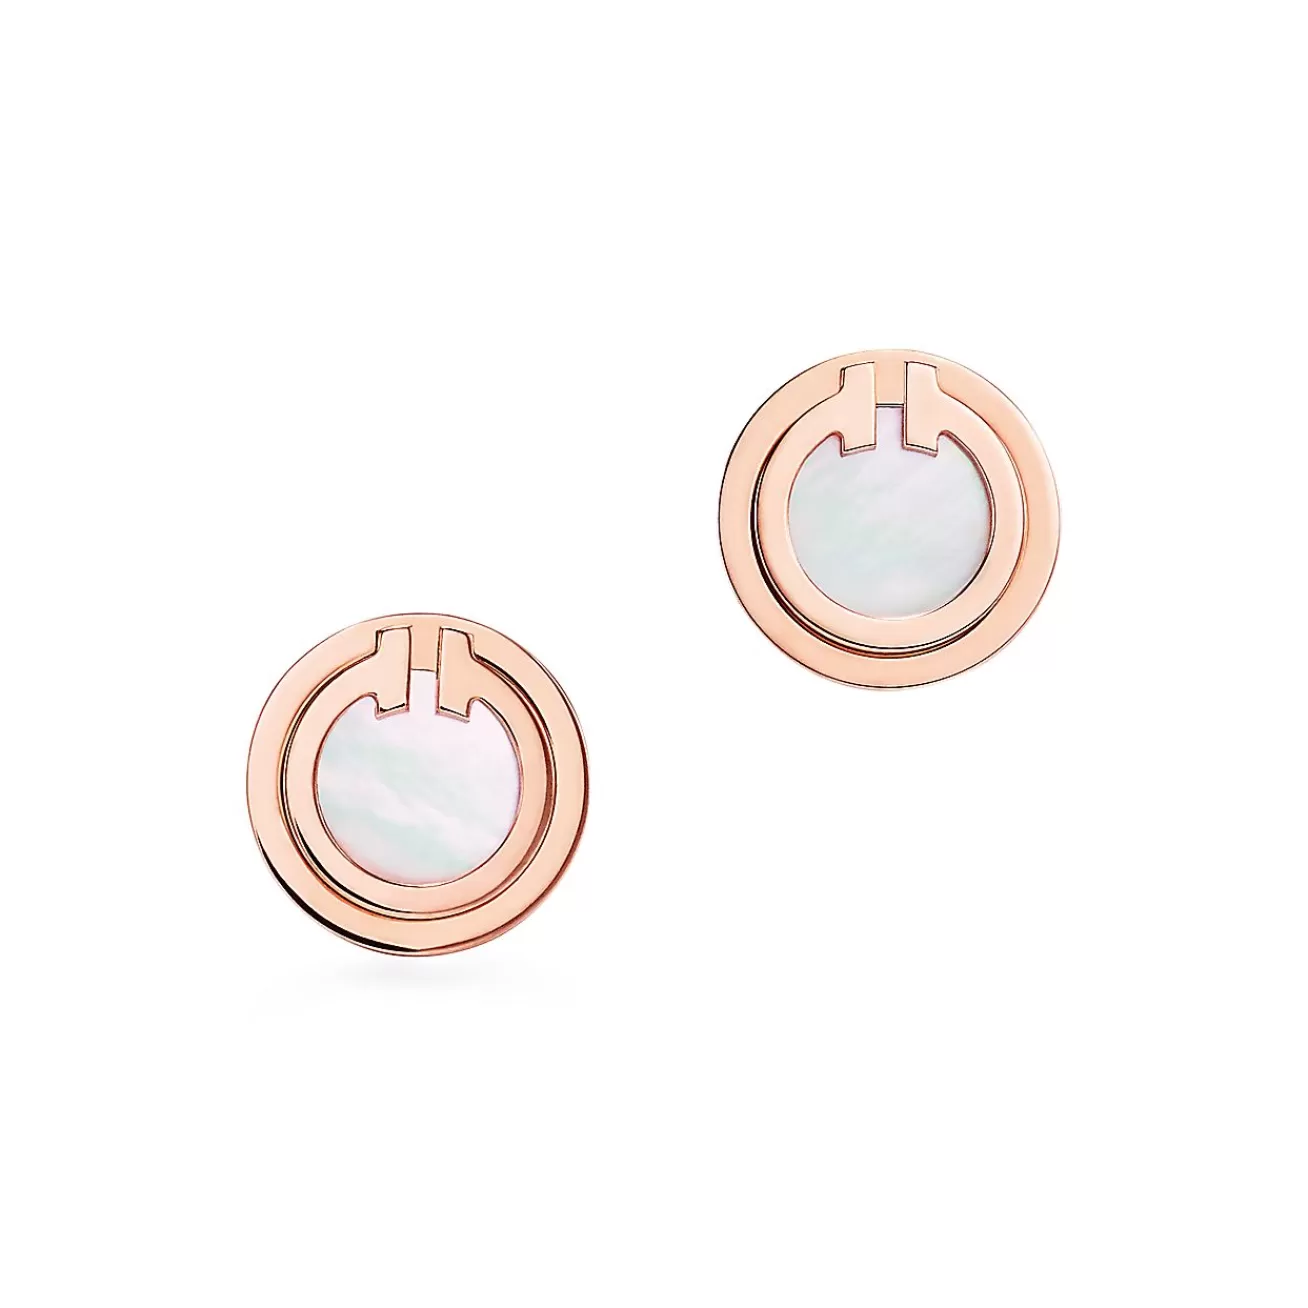 Tiffany & Co. Tiffany T mother-of-pearl circle earrings in 18k rose gold. | ^ Earrings | Rose Gold Jewelry